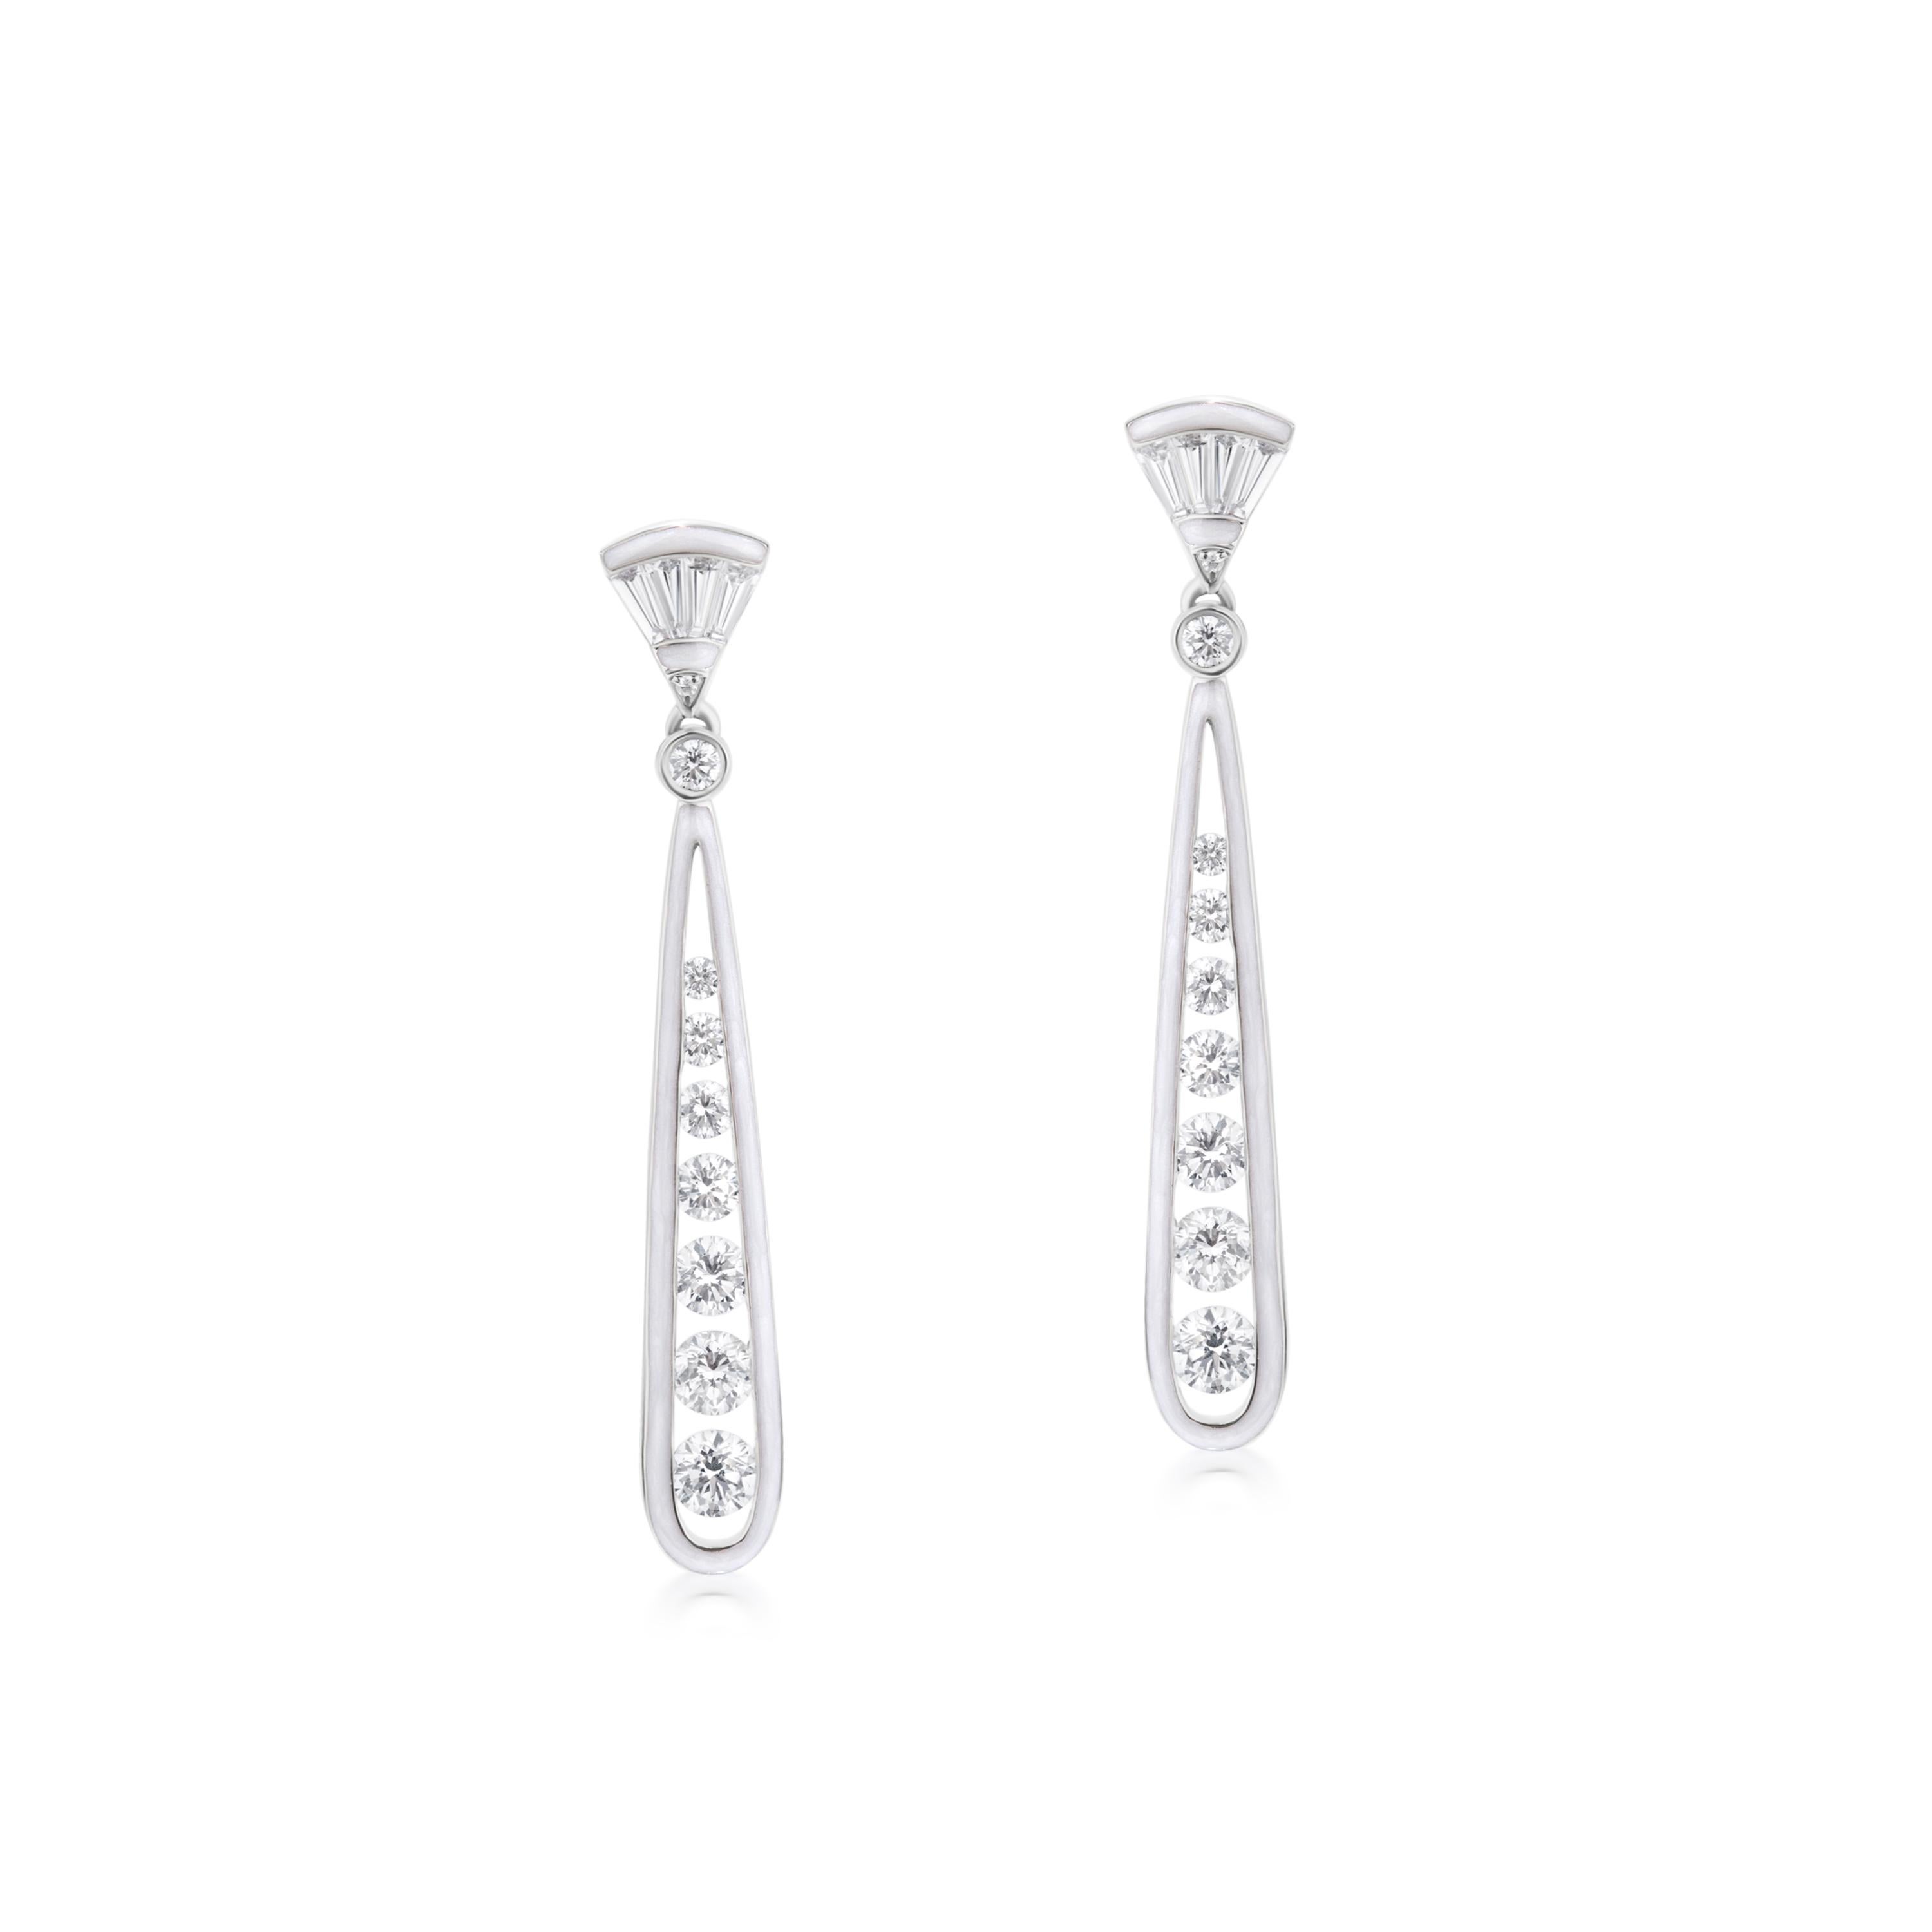 Contemporary Luxle 1.58 Cttw. Diamond and White Enamel Drop Earrings in 18K White Gold